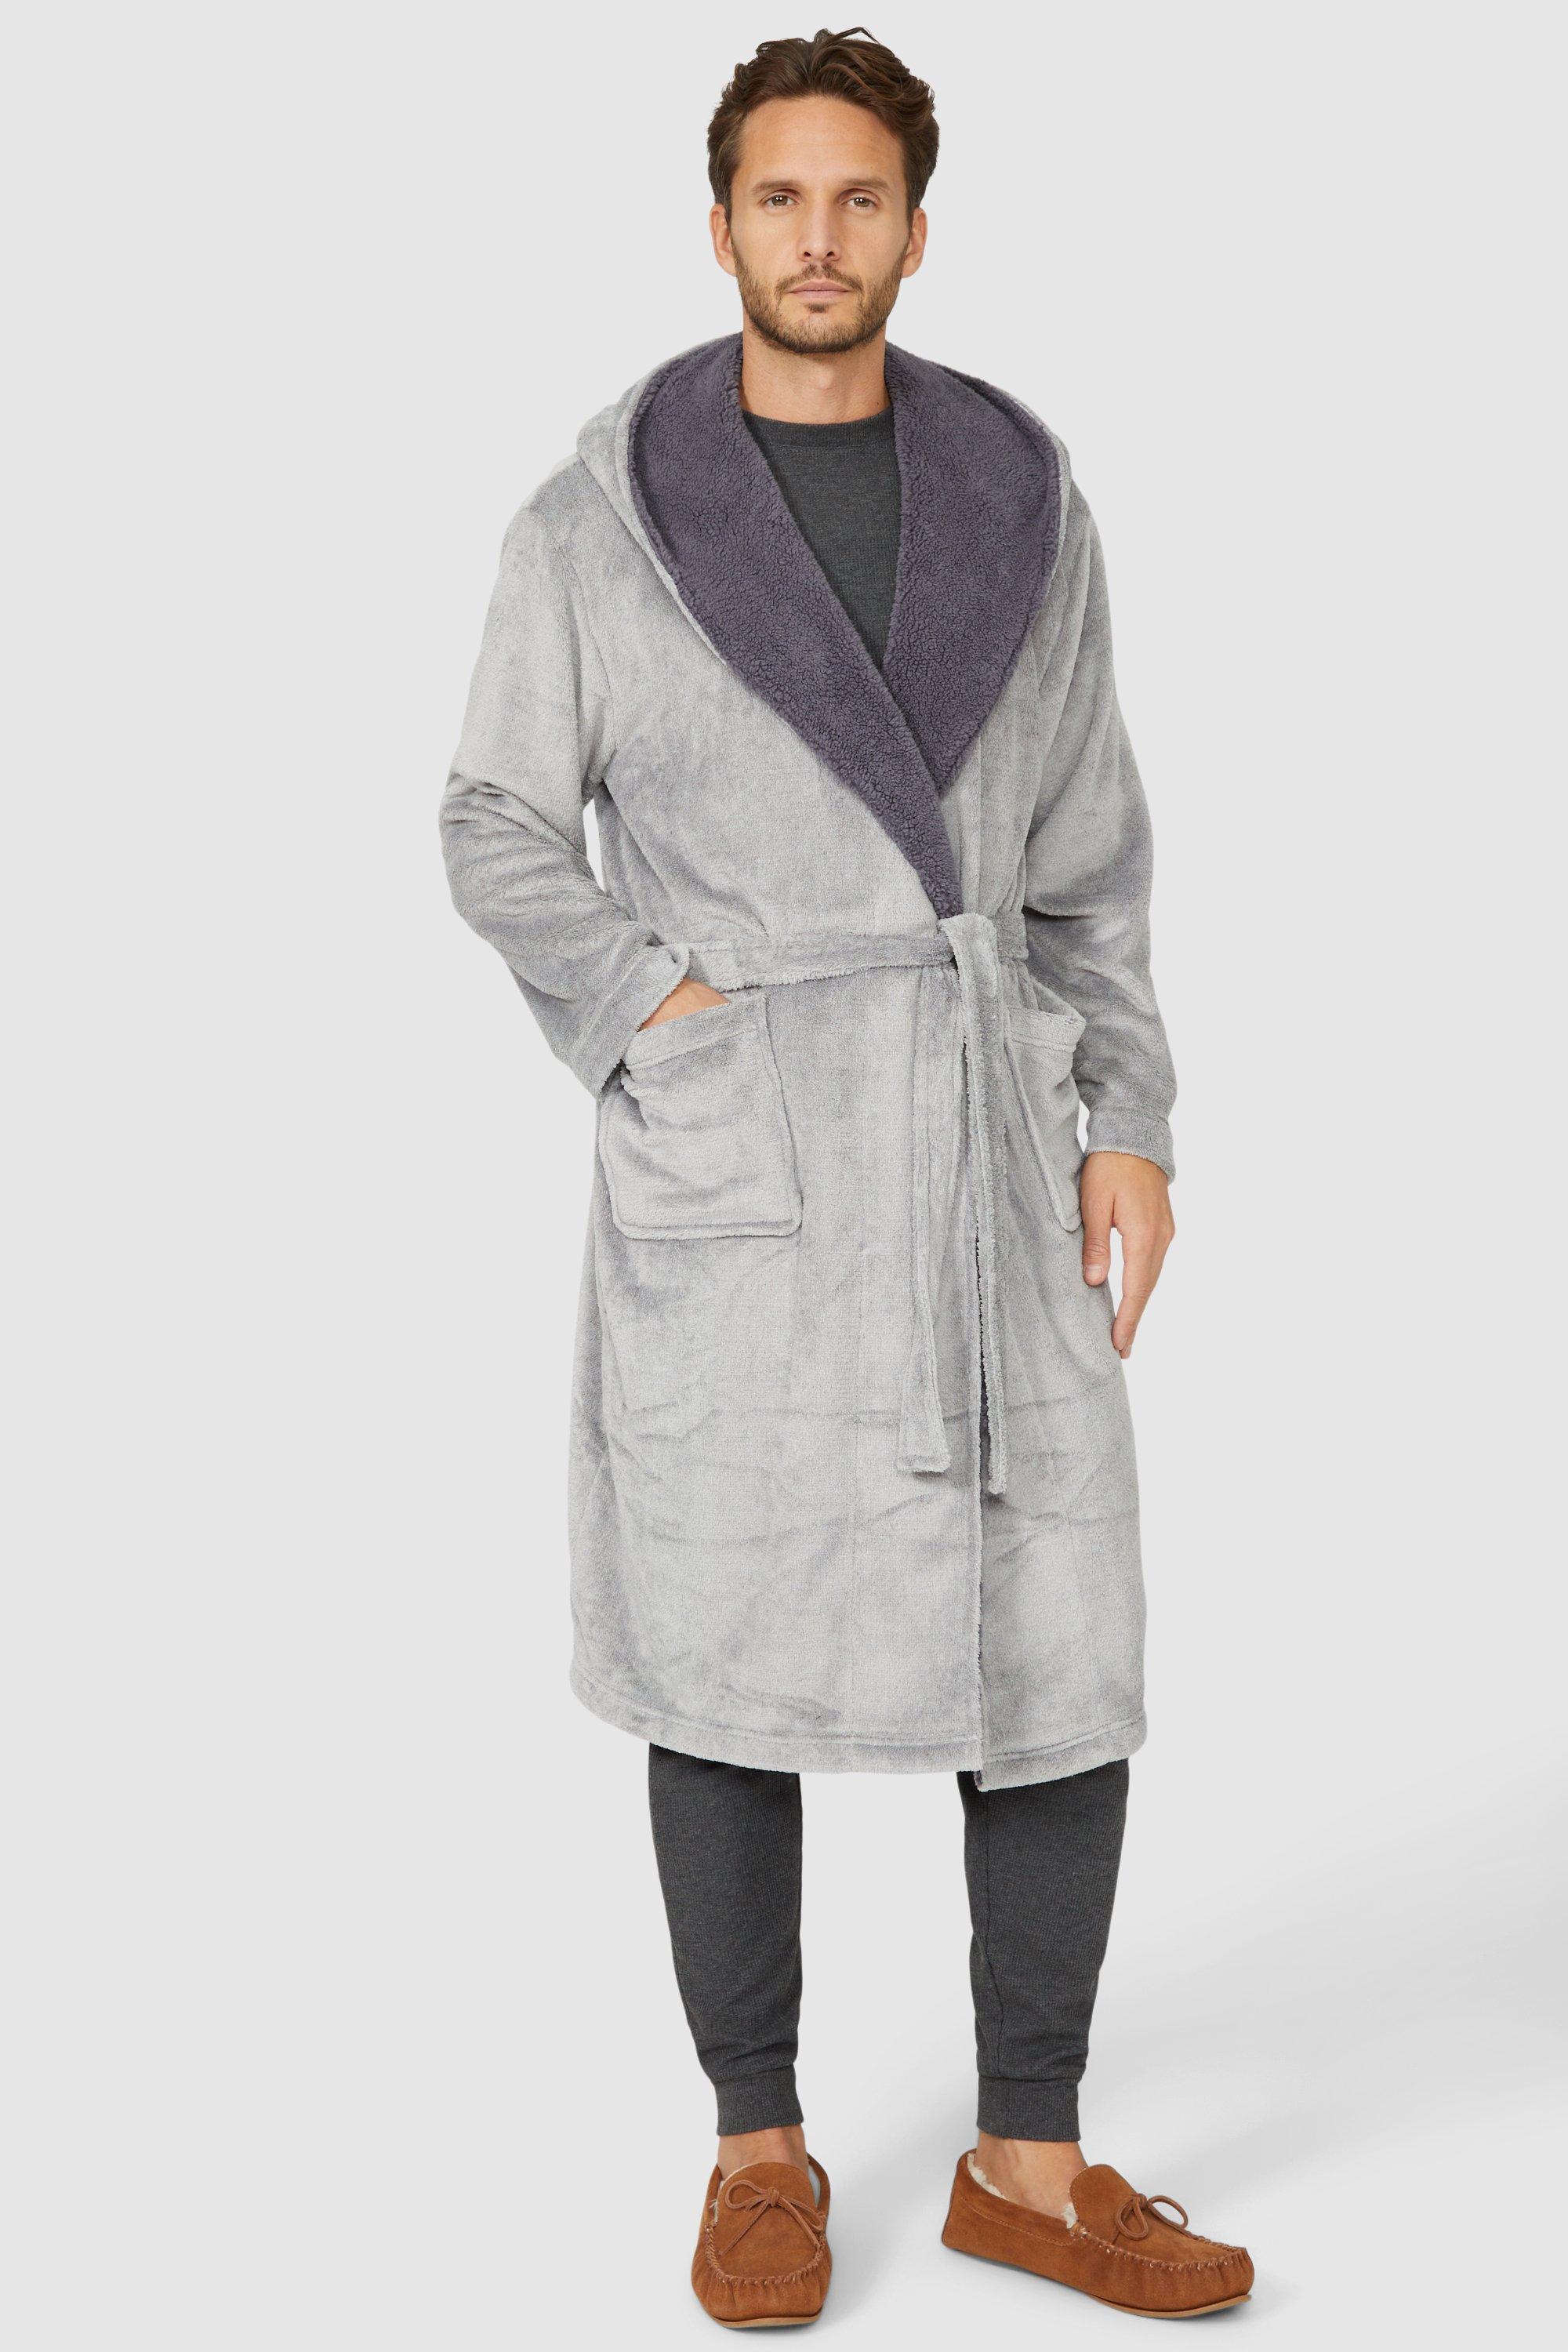 Two Tone Contrast Hooded Fleece Gown